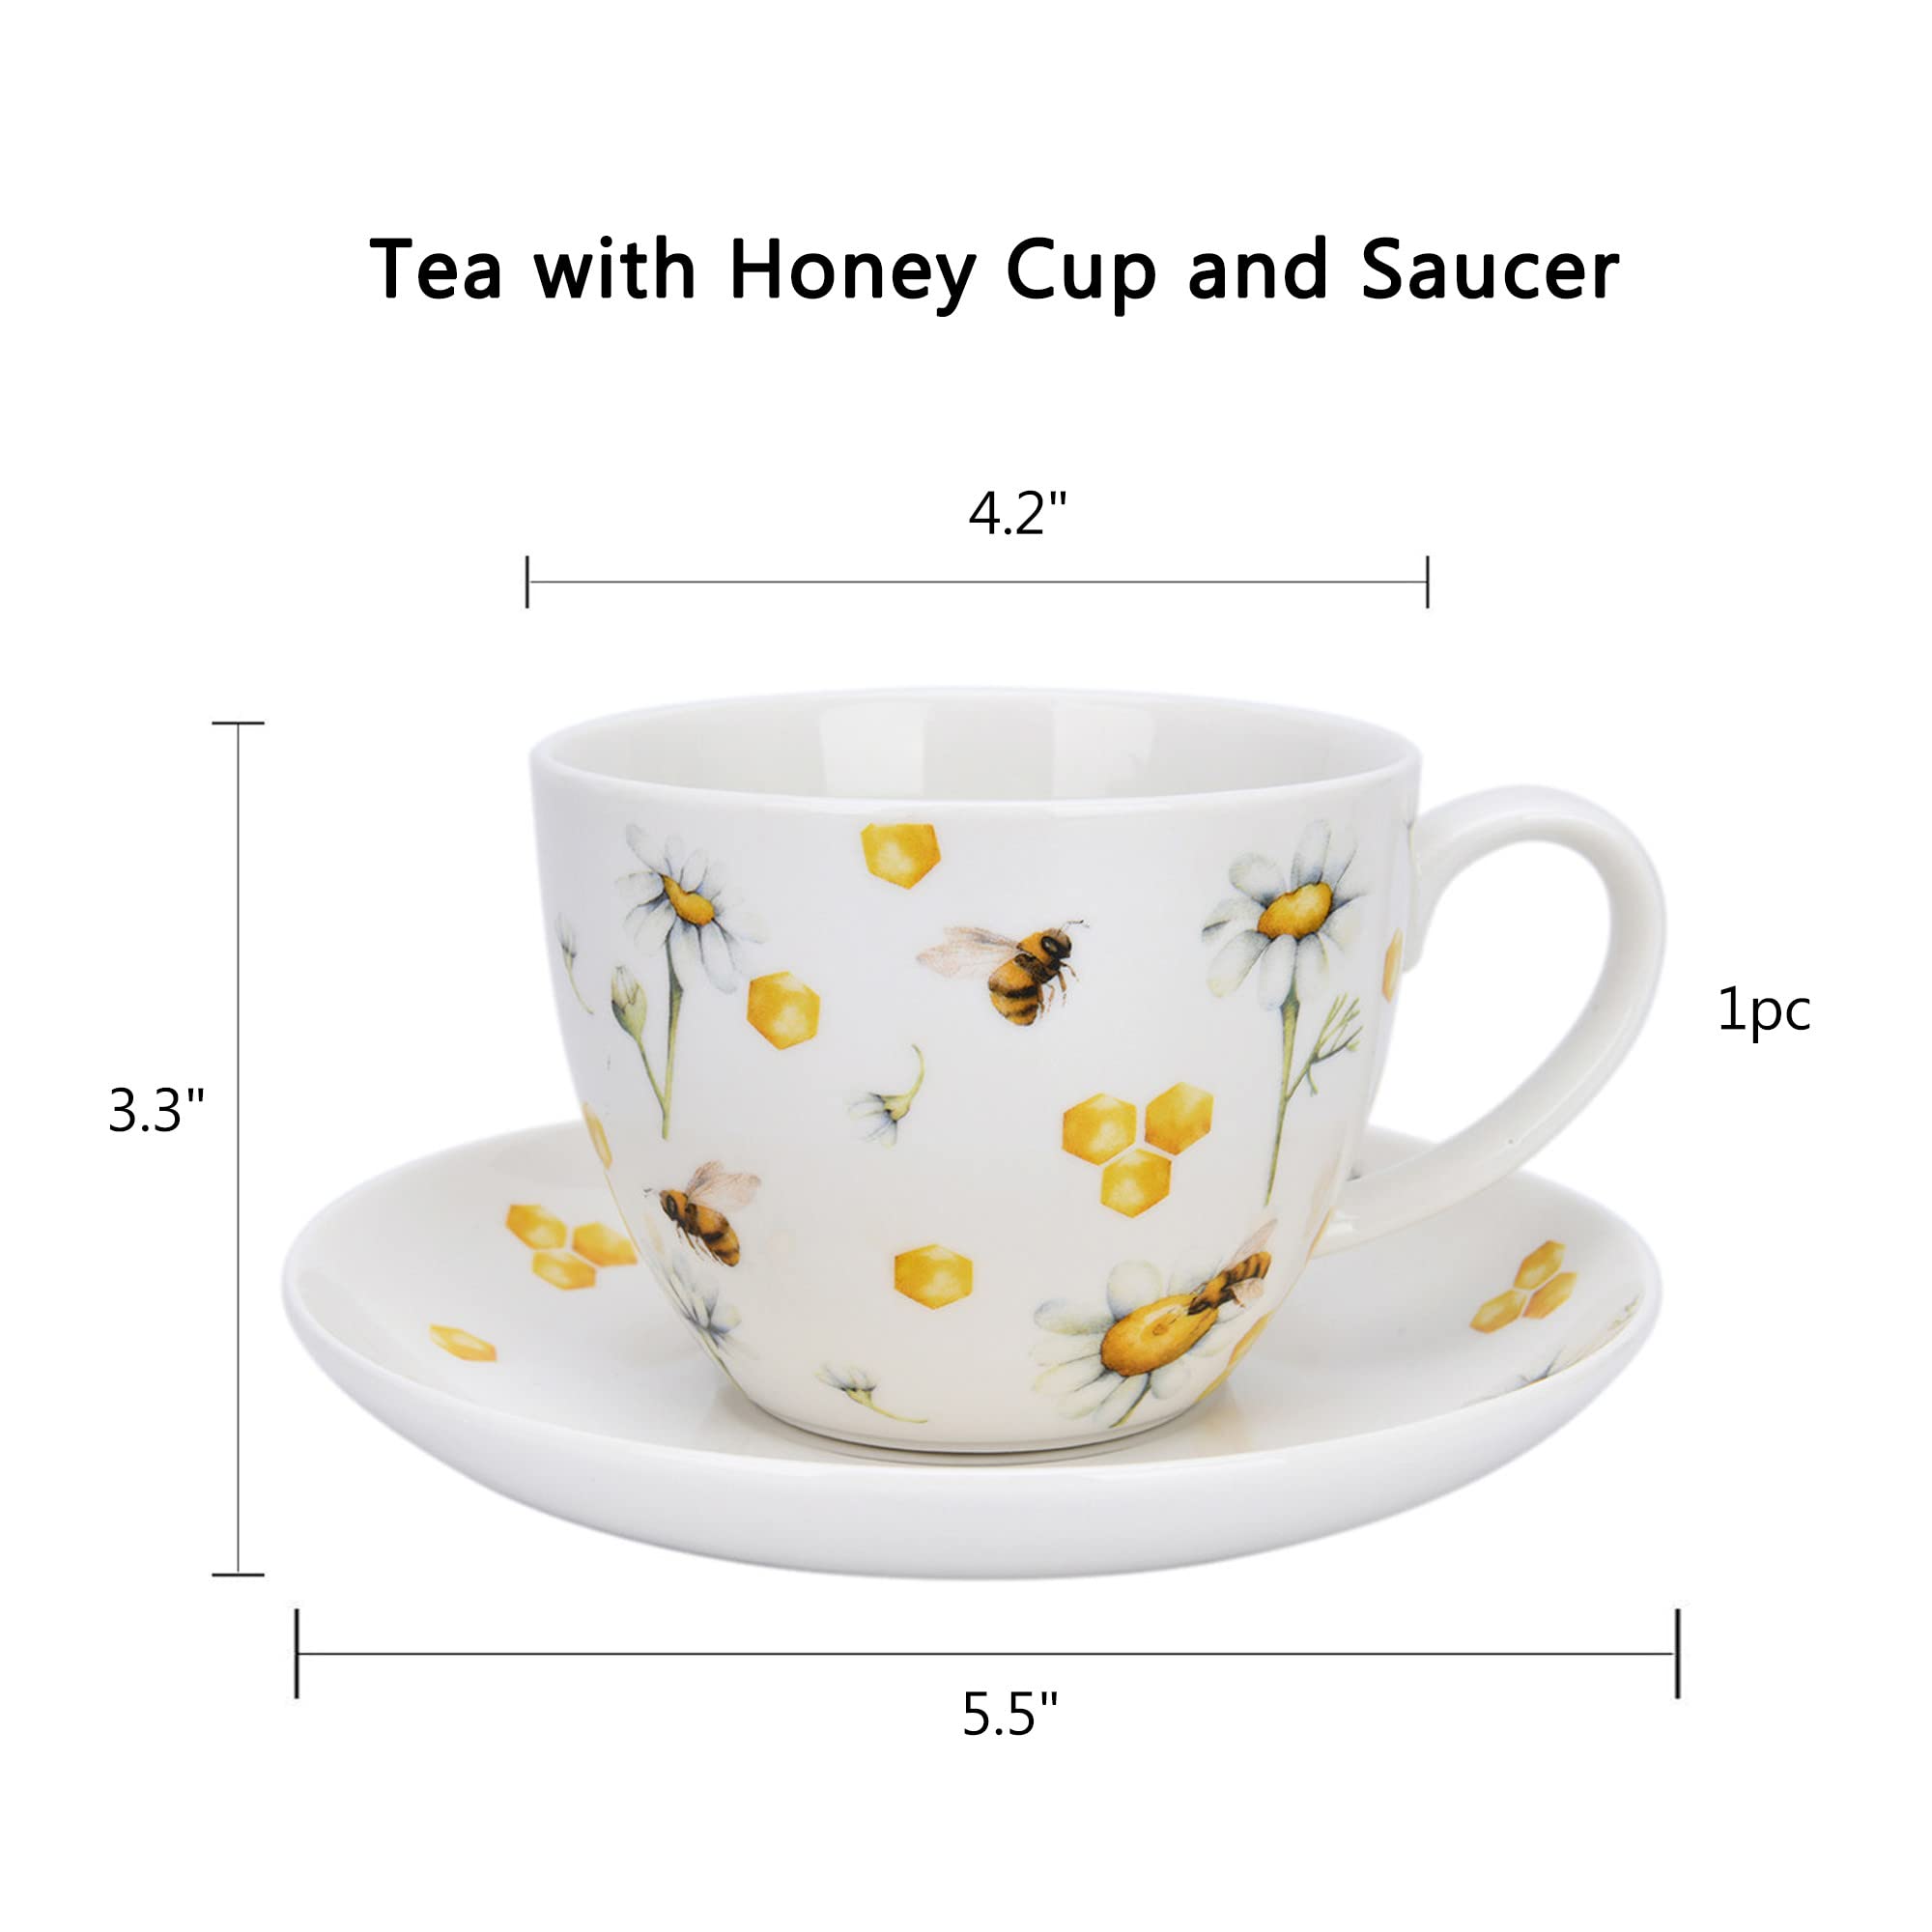 STP GOODS Bone China Kitchen Teacups Tea with Honey Cup and Saucer 15.2 fl oz (450 ml) Pretty Tea Cup with Matching Saucer Christmas Mugs